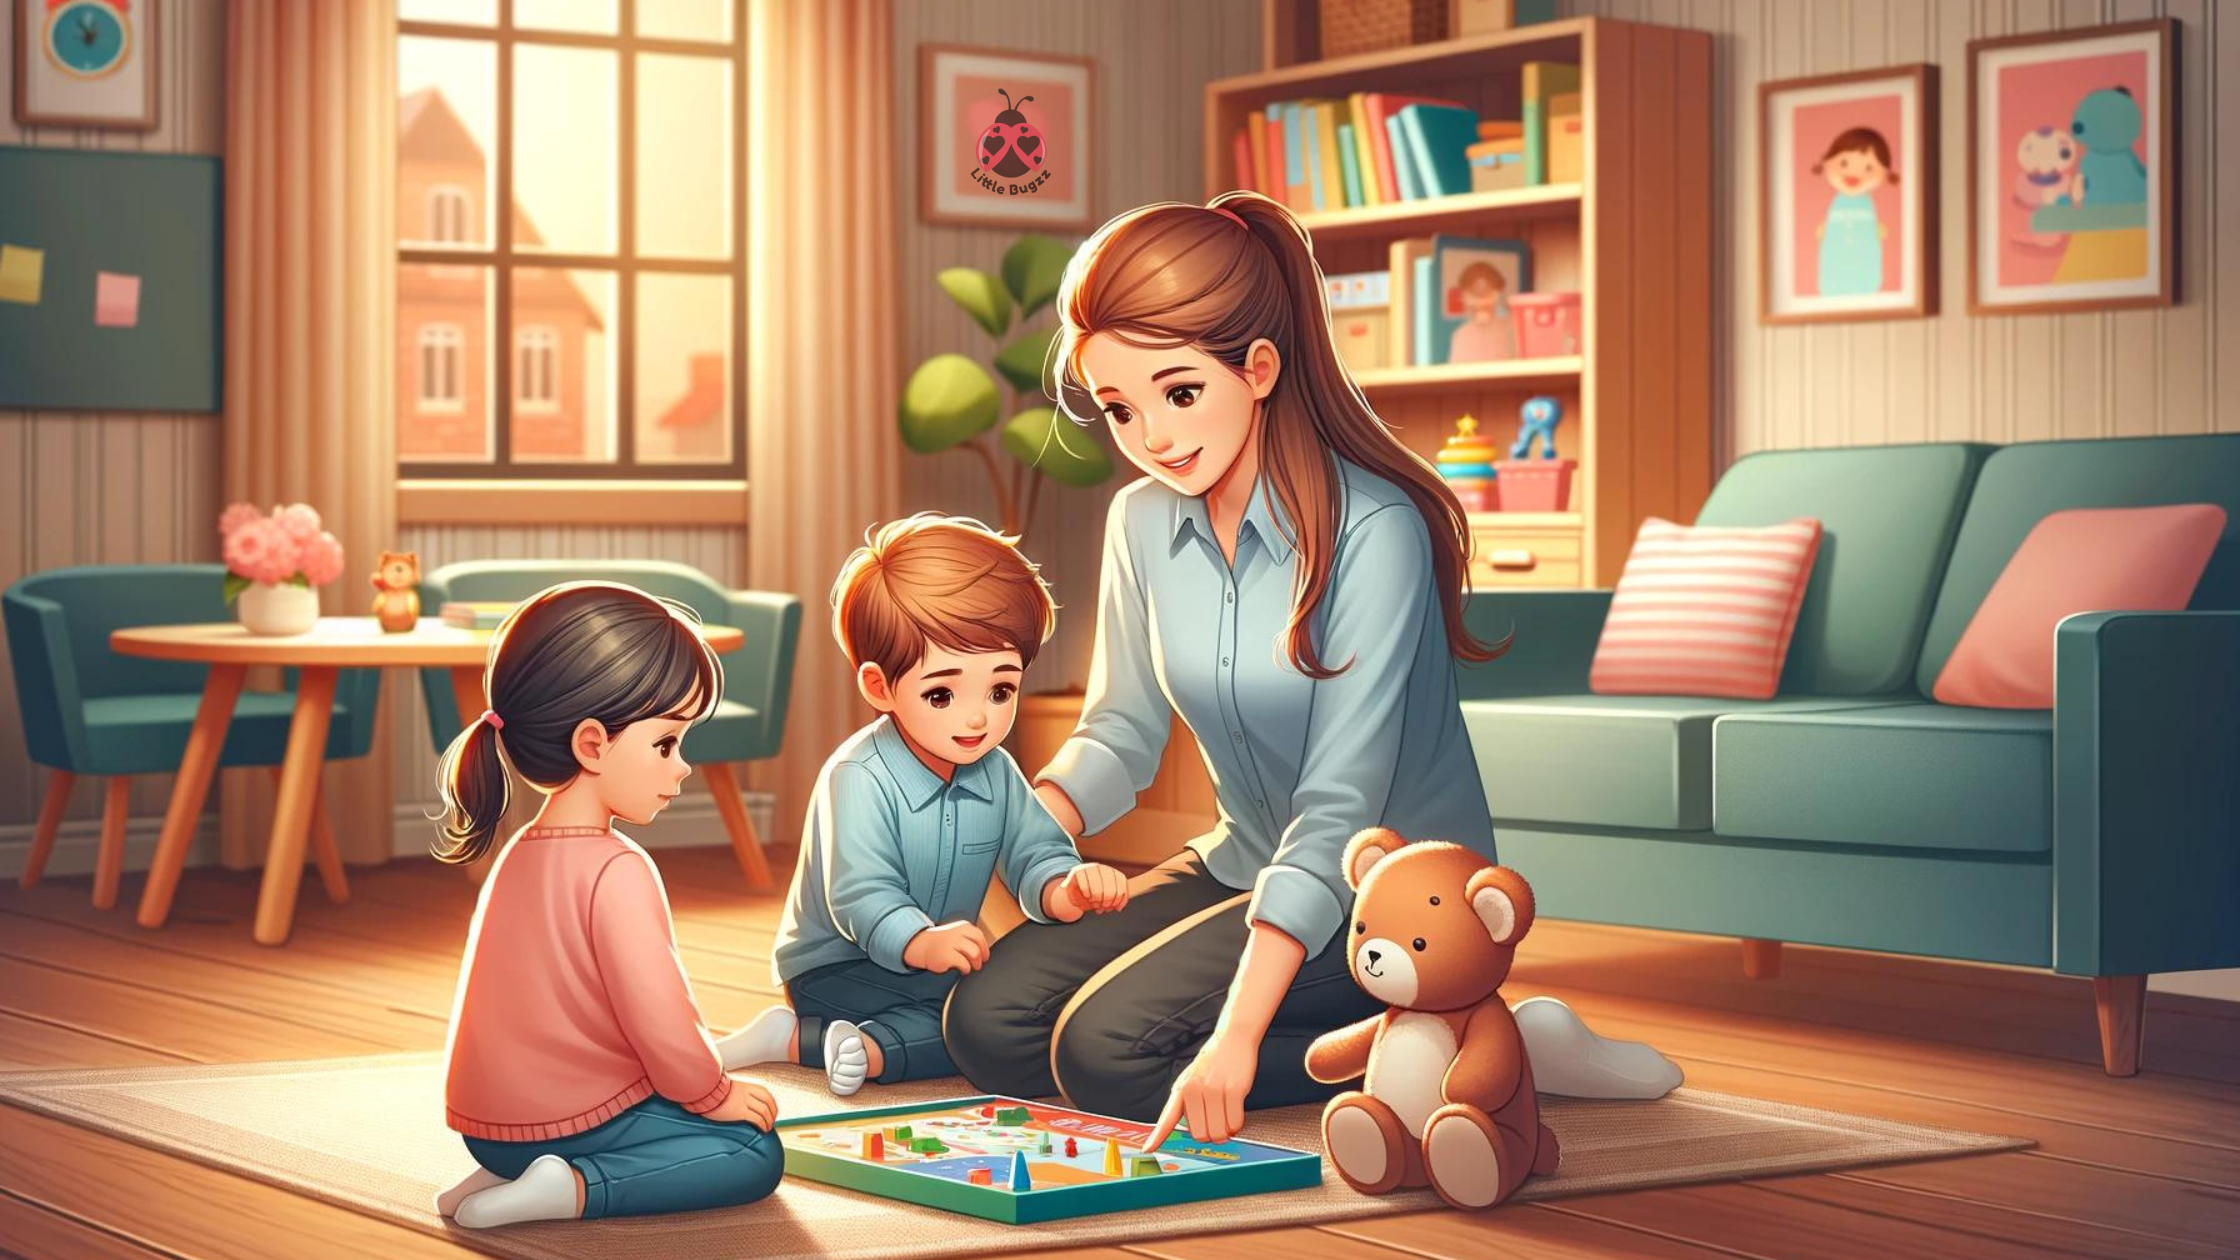 A babysitter engages with two young children playing a board game on a rug in a cozy living room, with the Little Bugz logo on the wall, symbolizing a nurturing and safe environment for child care.